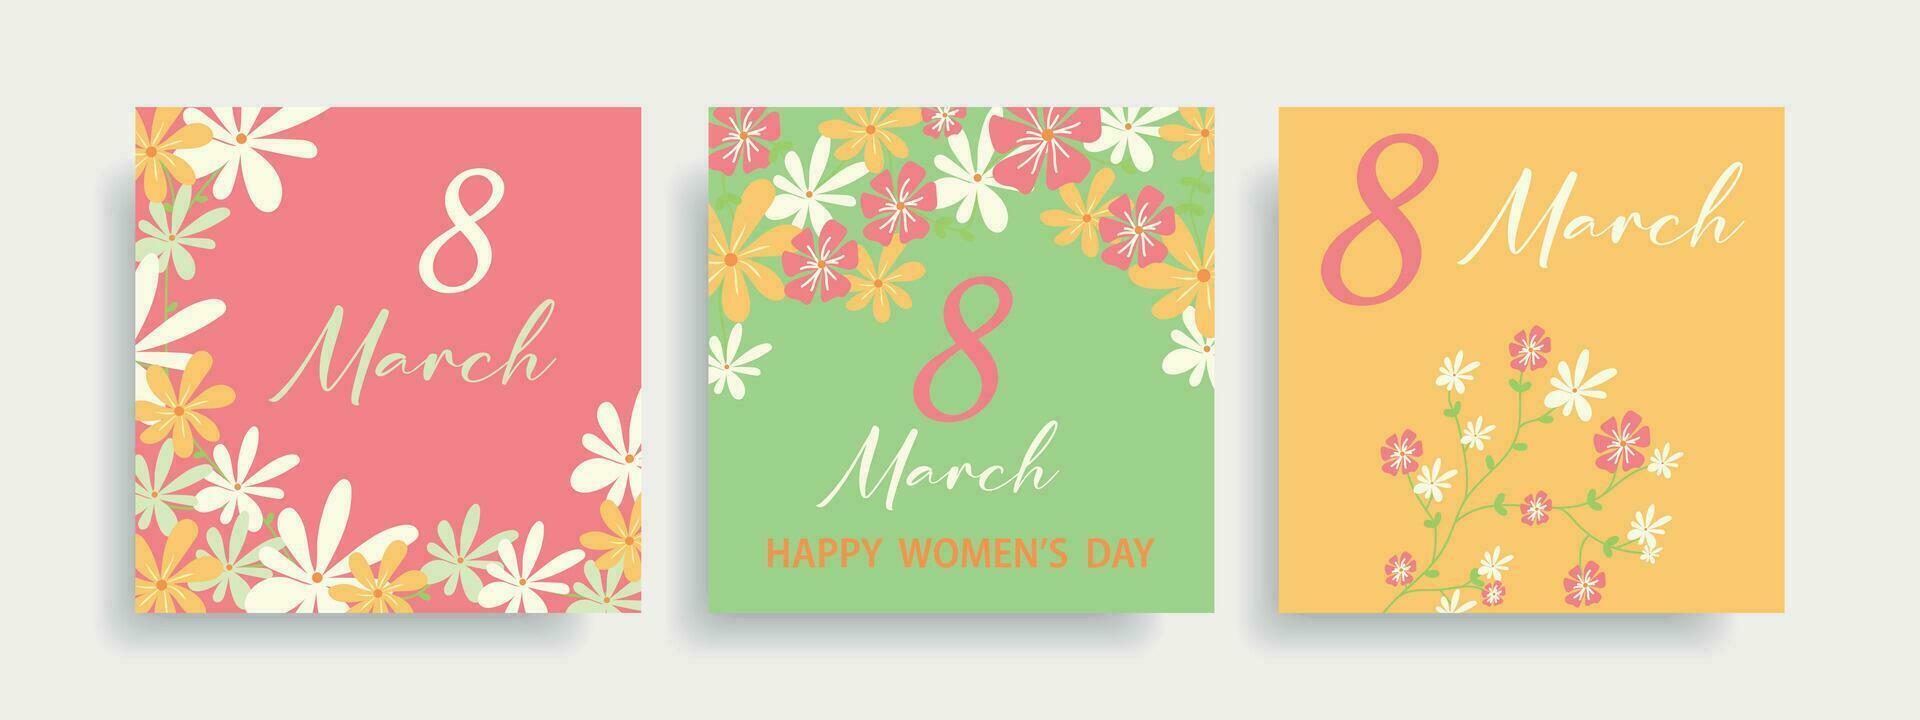 A set of cute cards for March 8th with daisies. vector